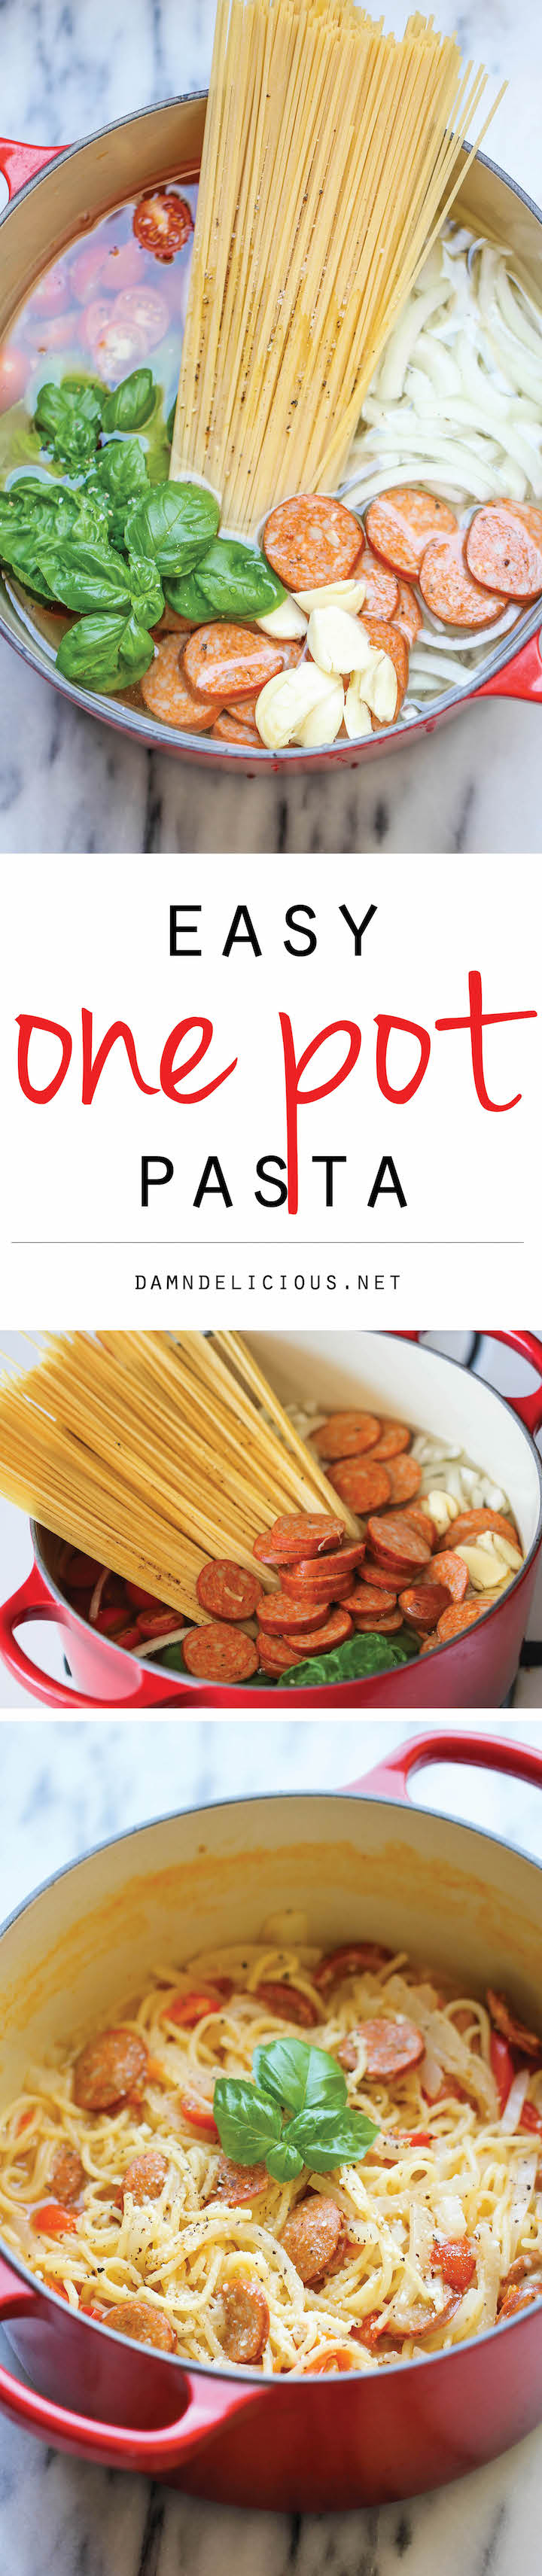 One Pot Pasta - The easiest, most amazing pasta you will ever make. Even the pasta gets cooked right in the pot. How easy is that?!